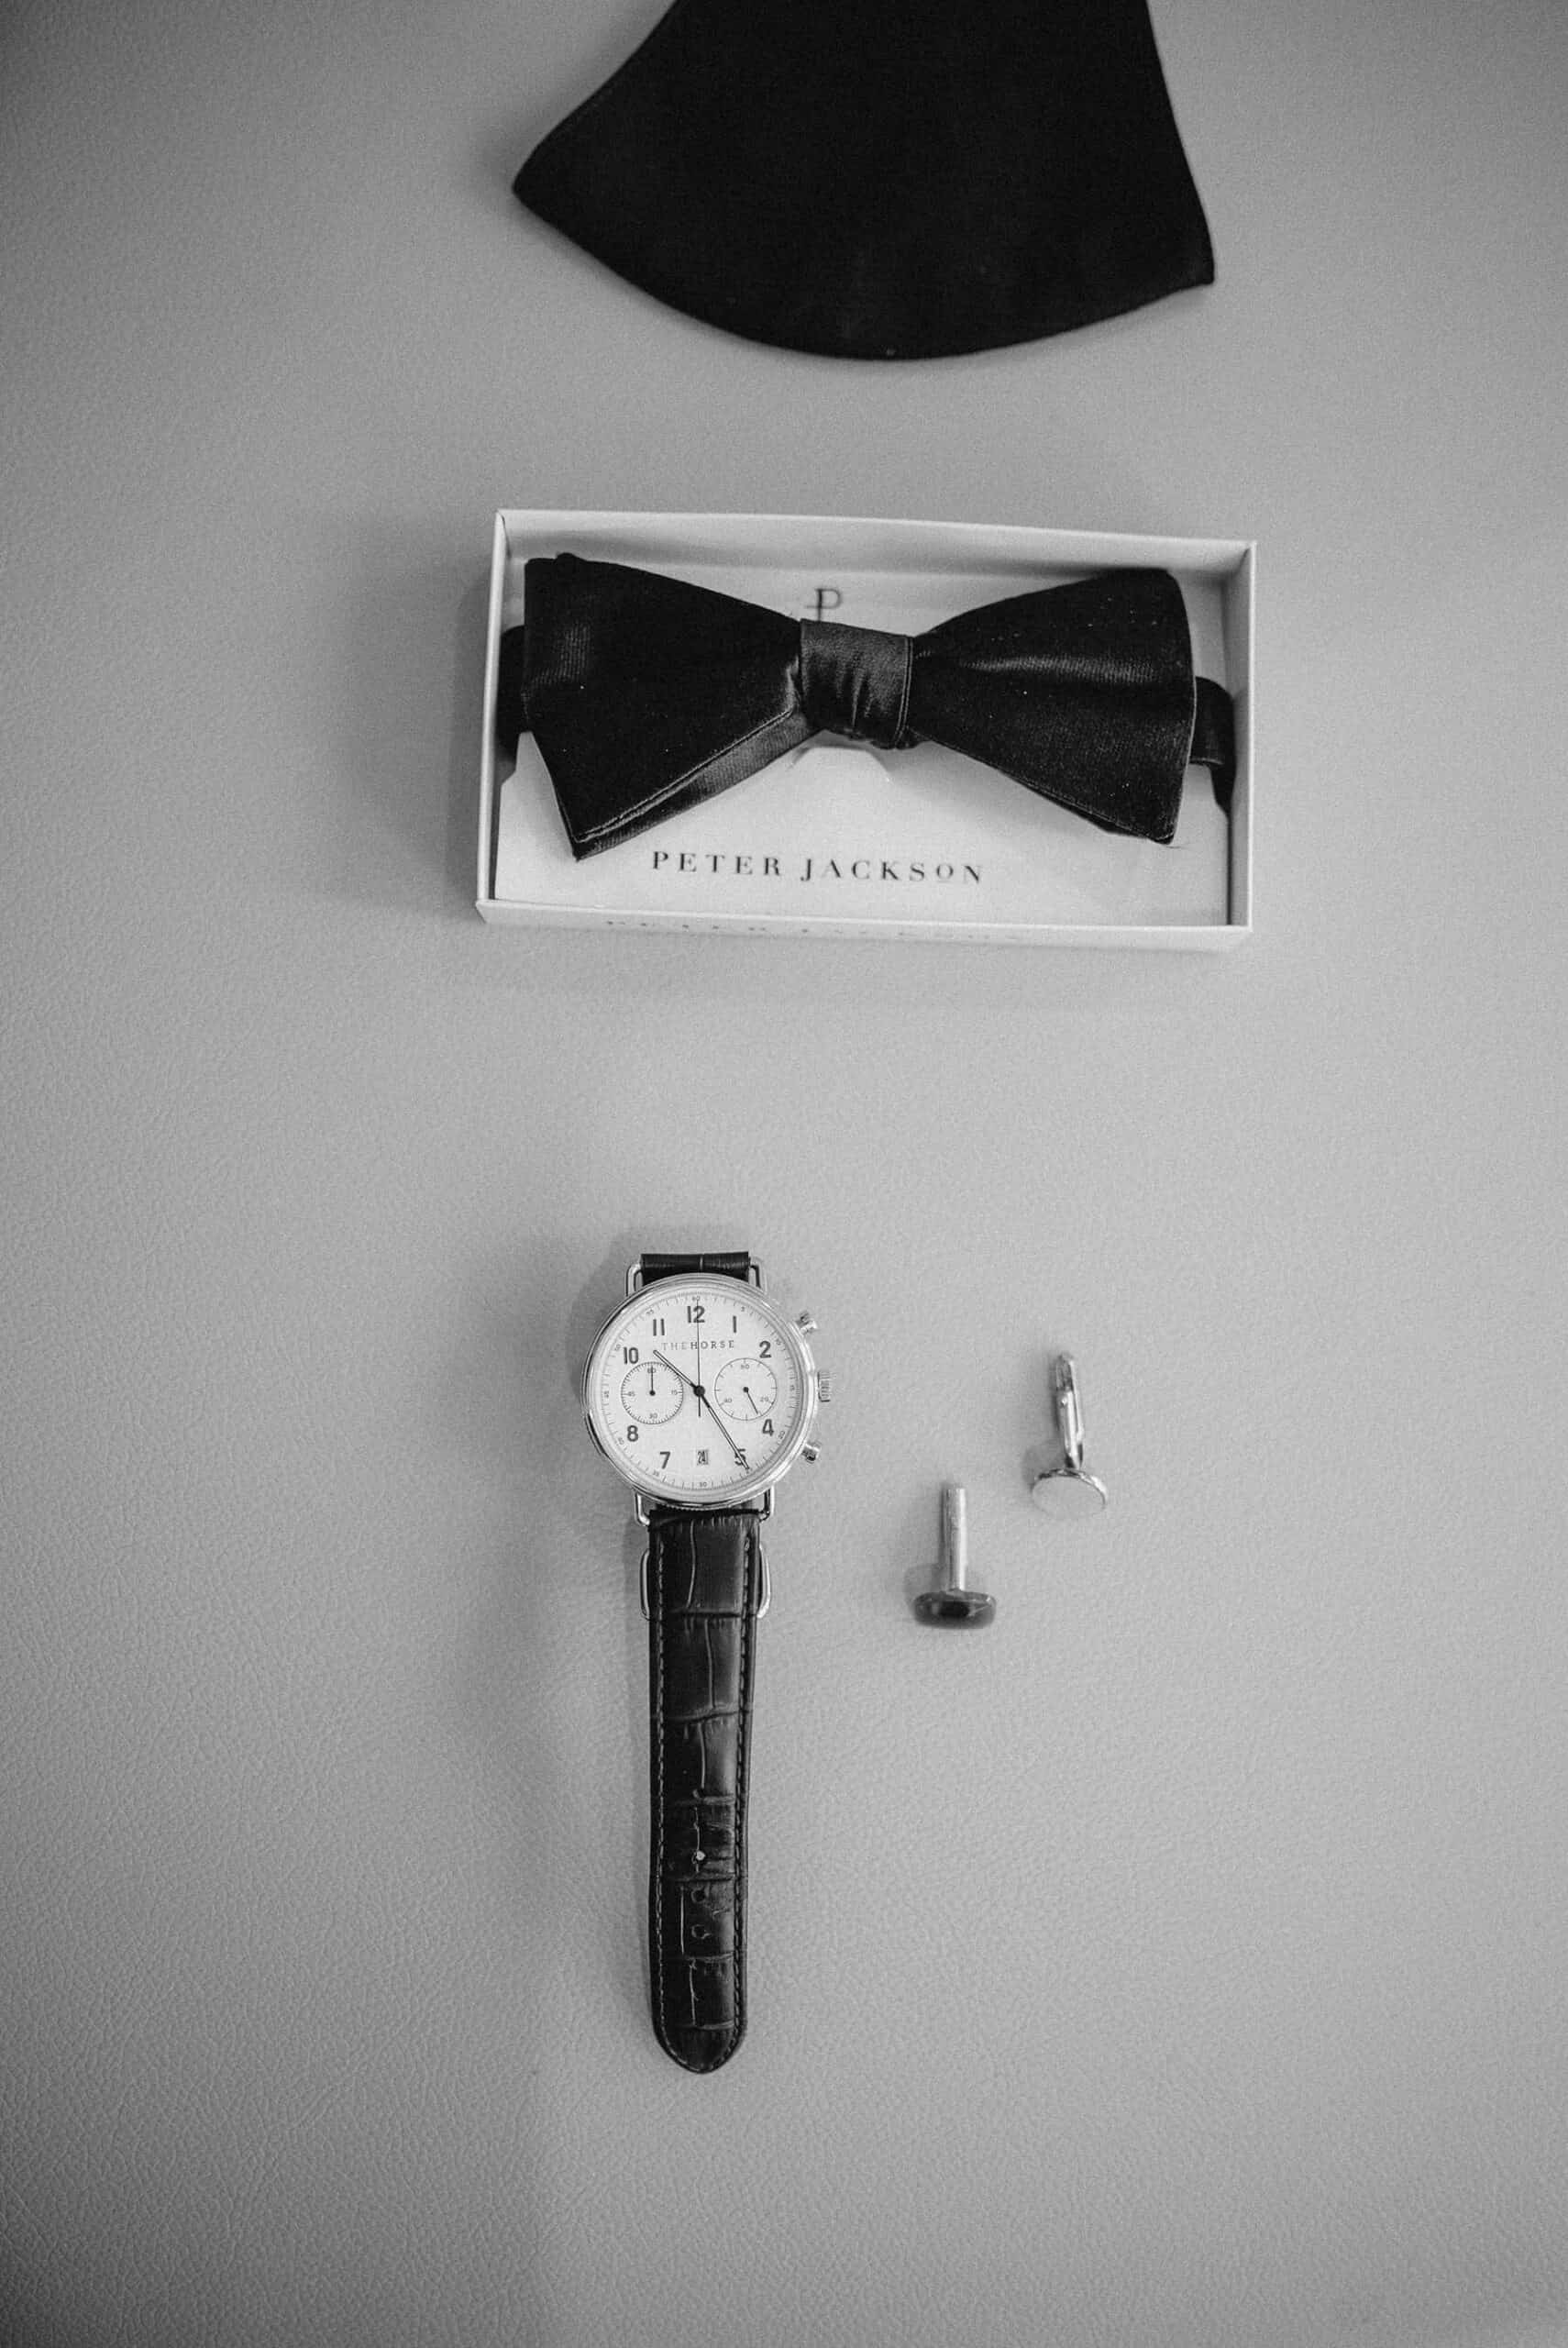 Black bow tie and watch